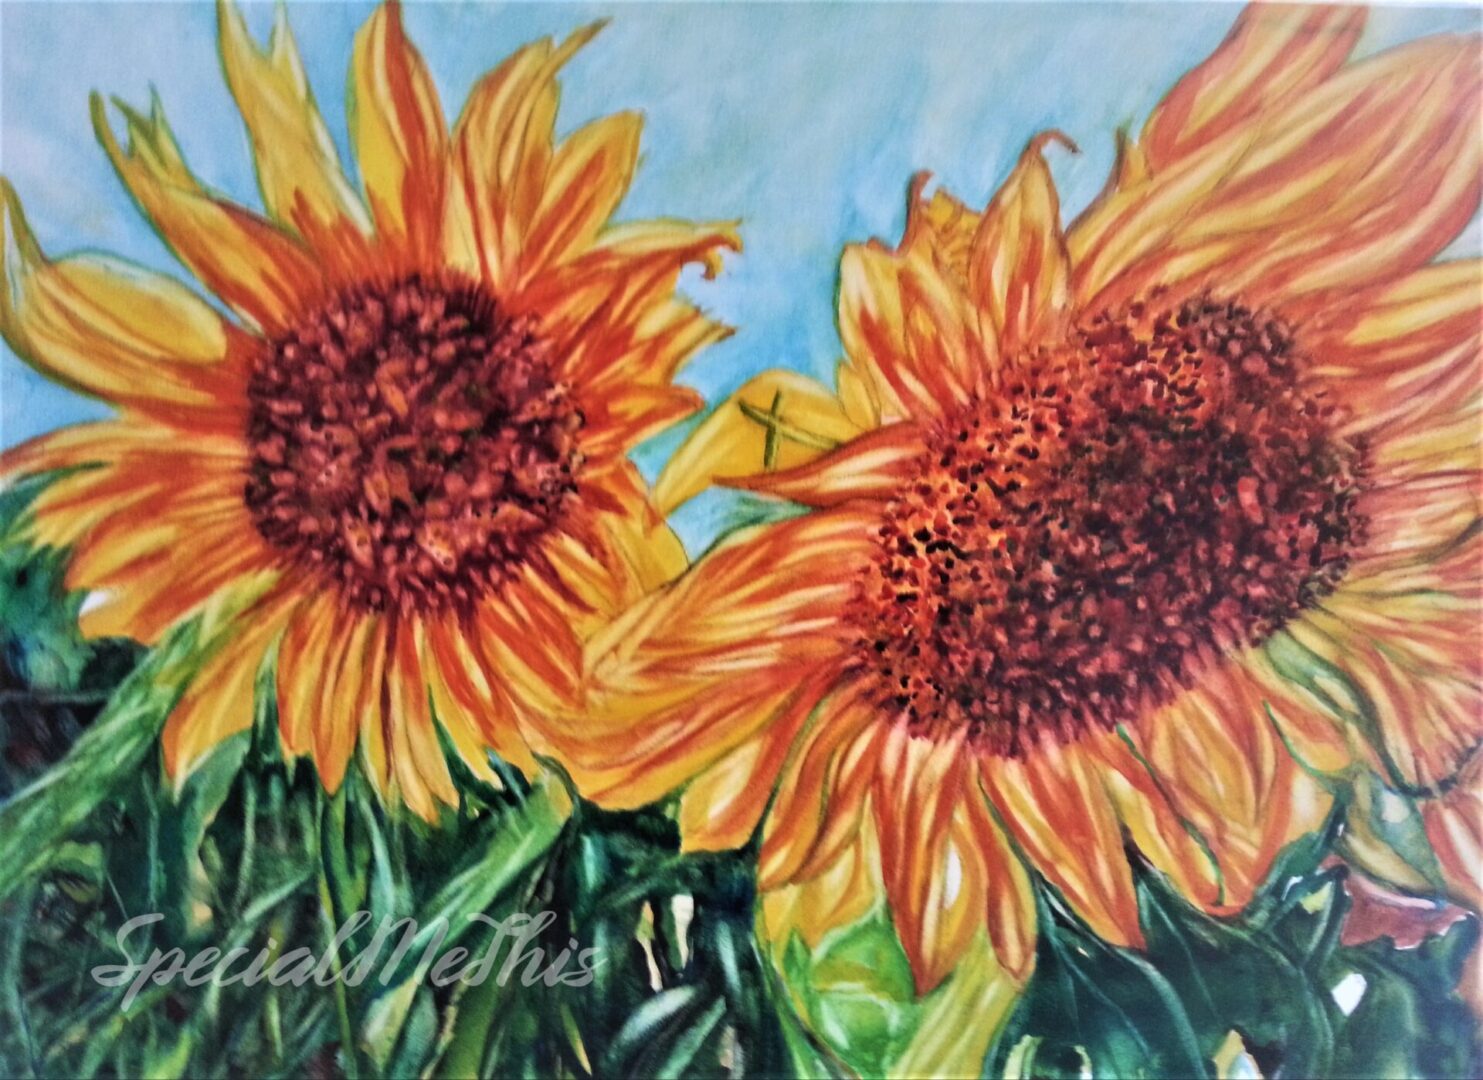 Two sunflowers in a field with blue sky